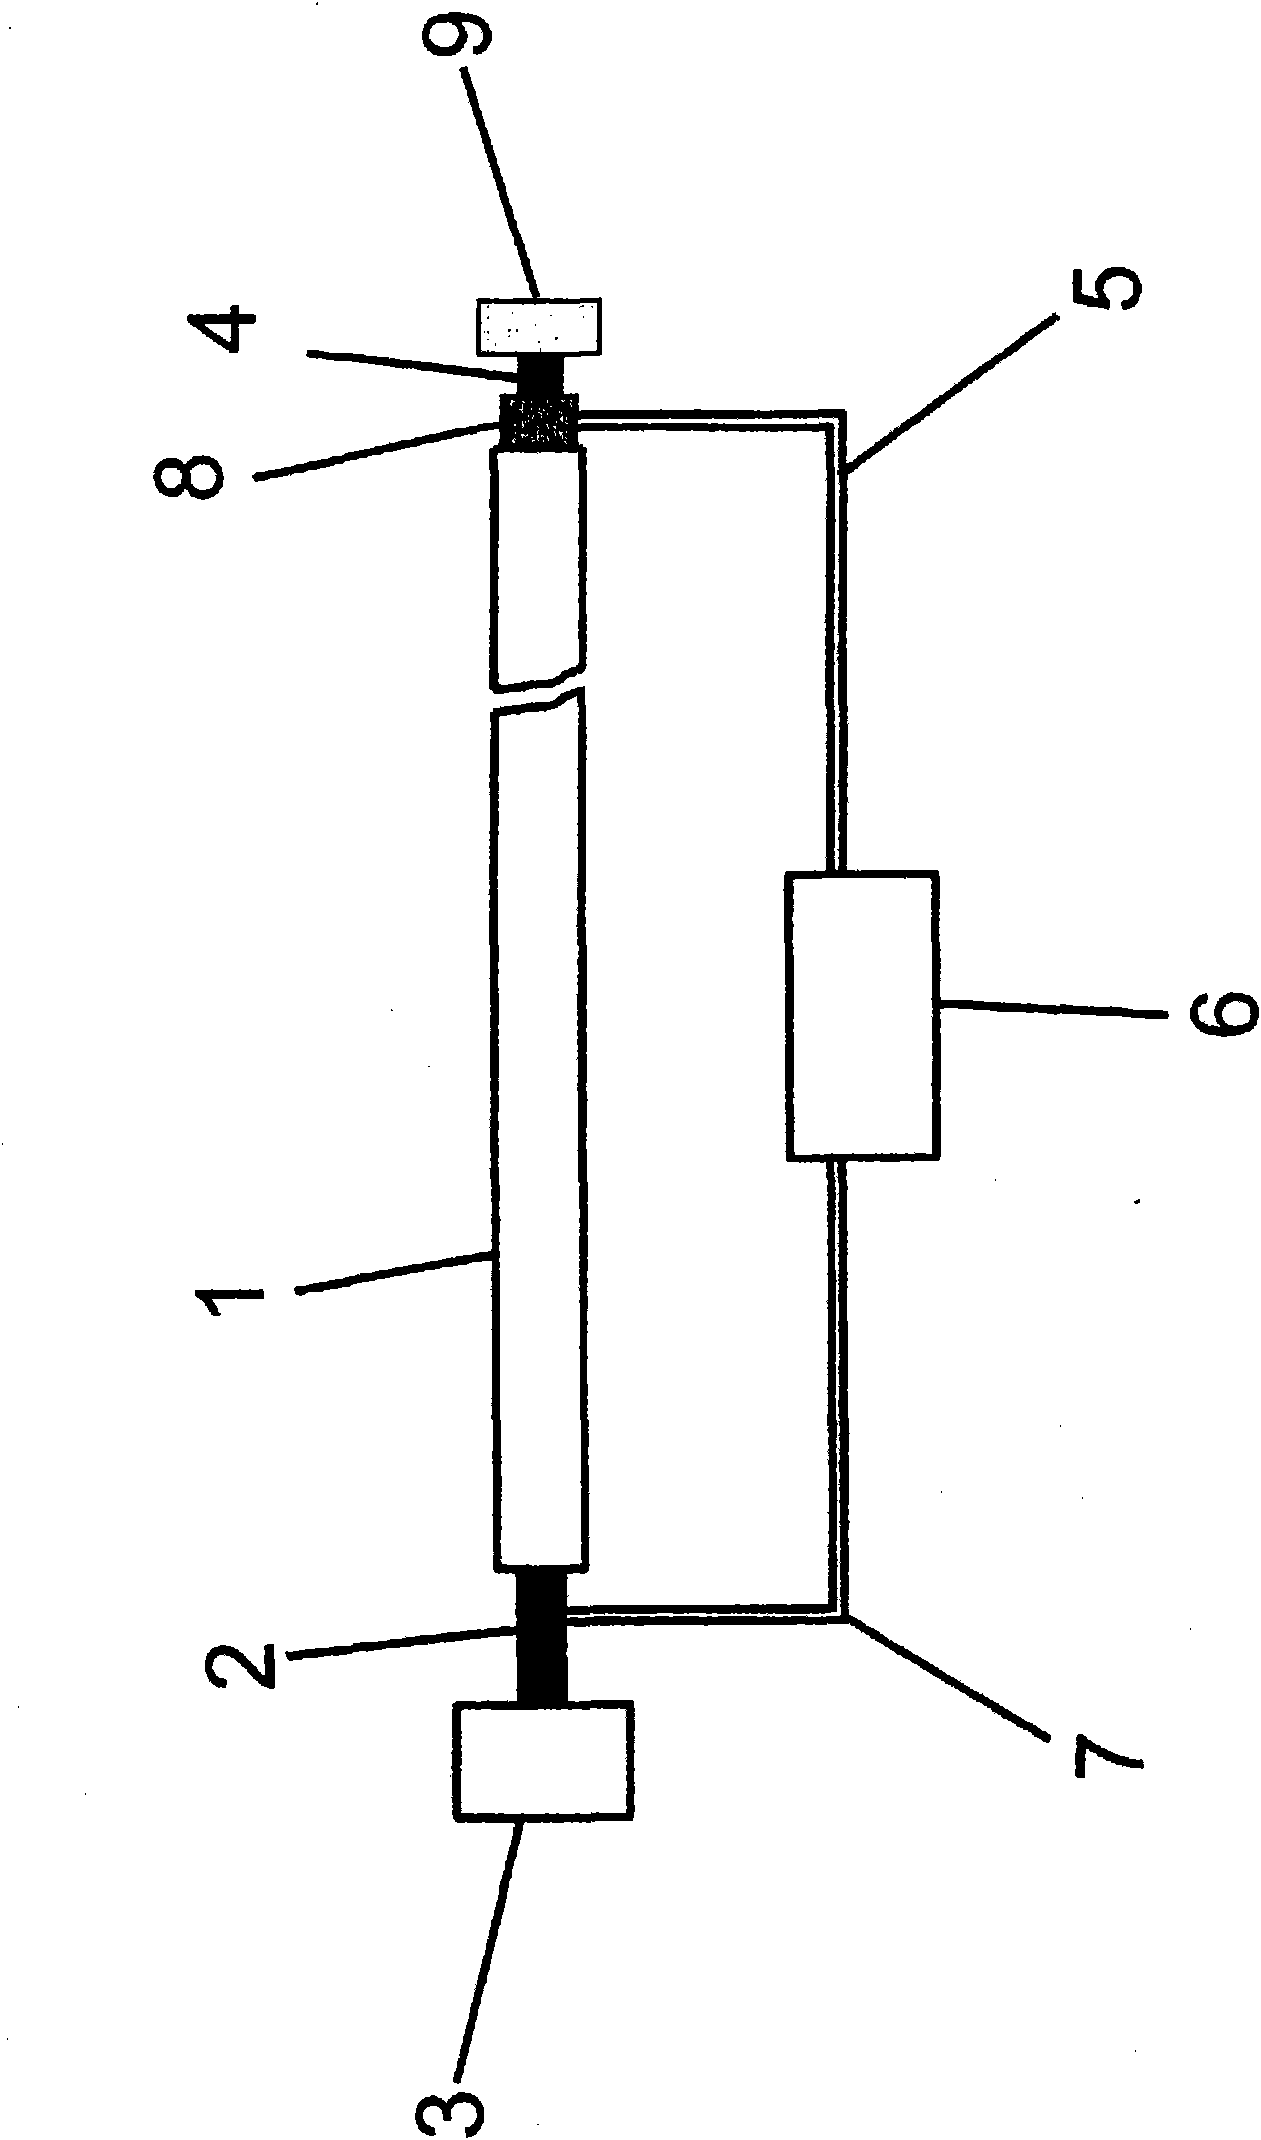 Method and device for calibrating acceleration and force sensors